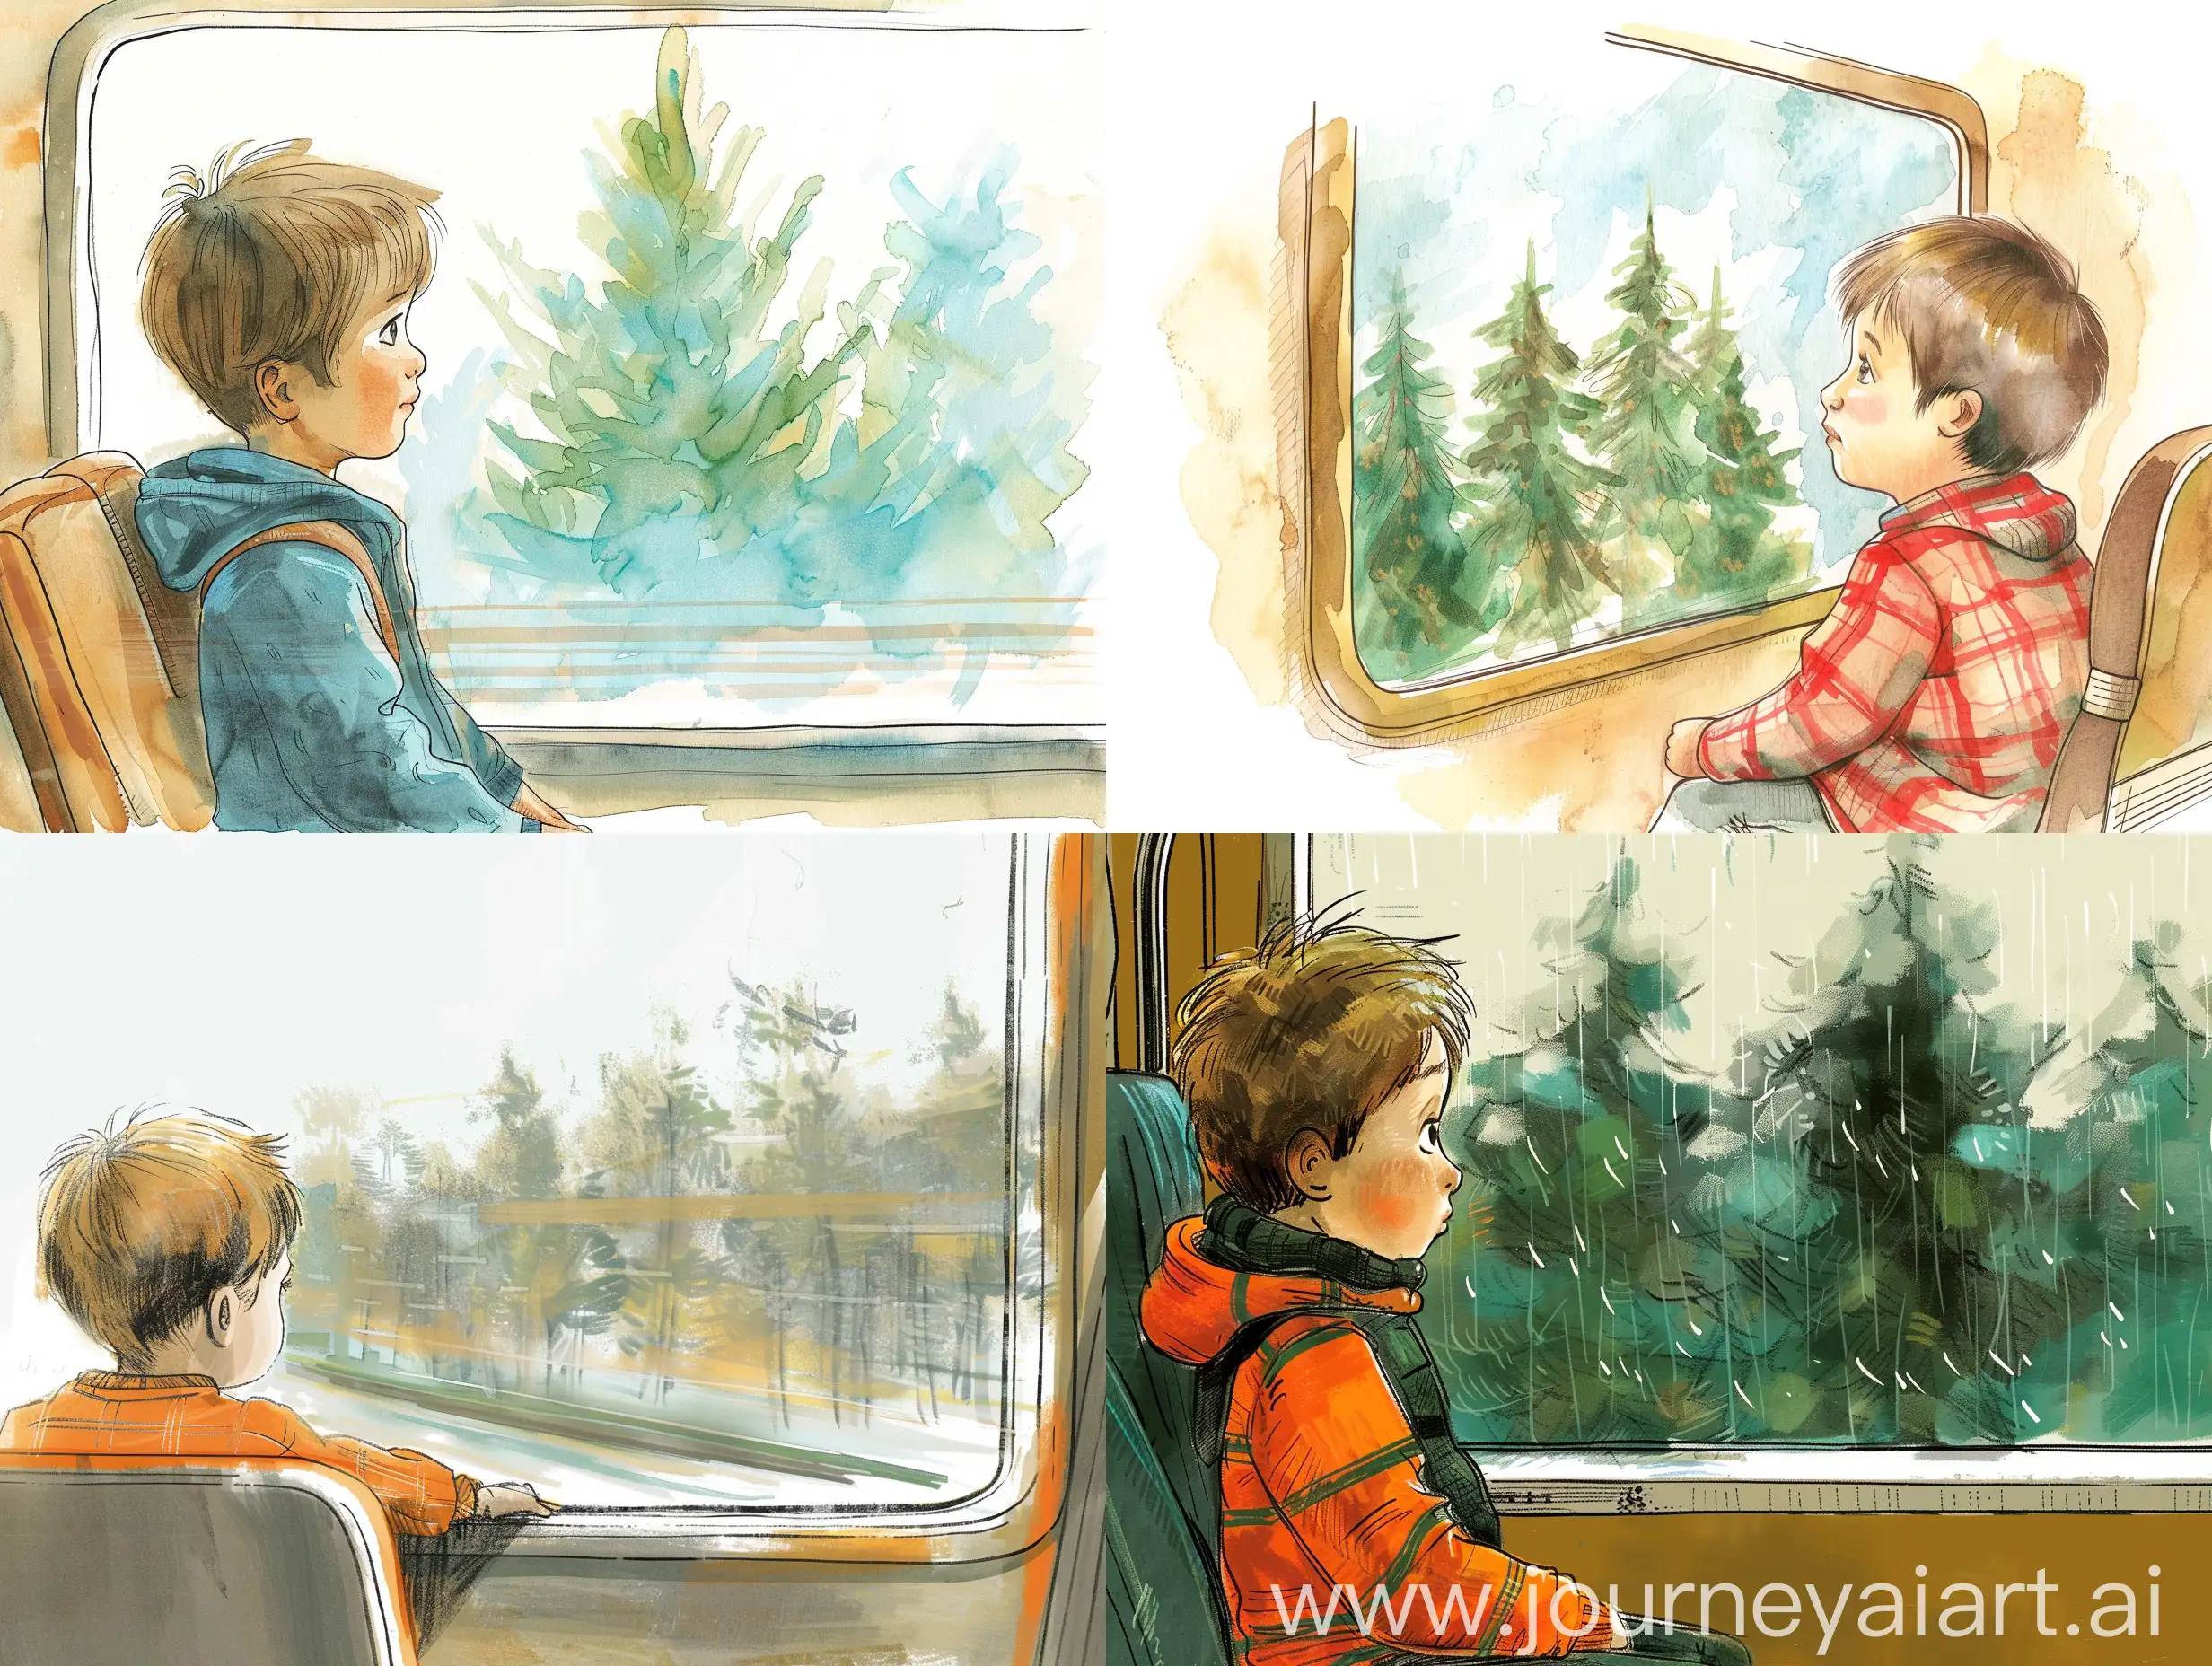 Draw a little boy who rides on a train and looks out the window, trees flash outside the window, in the style of children's book illustration